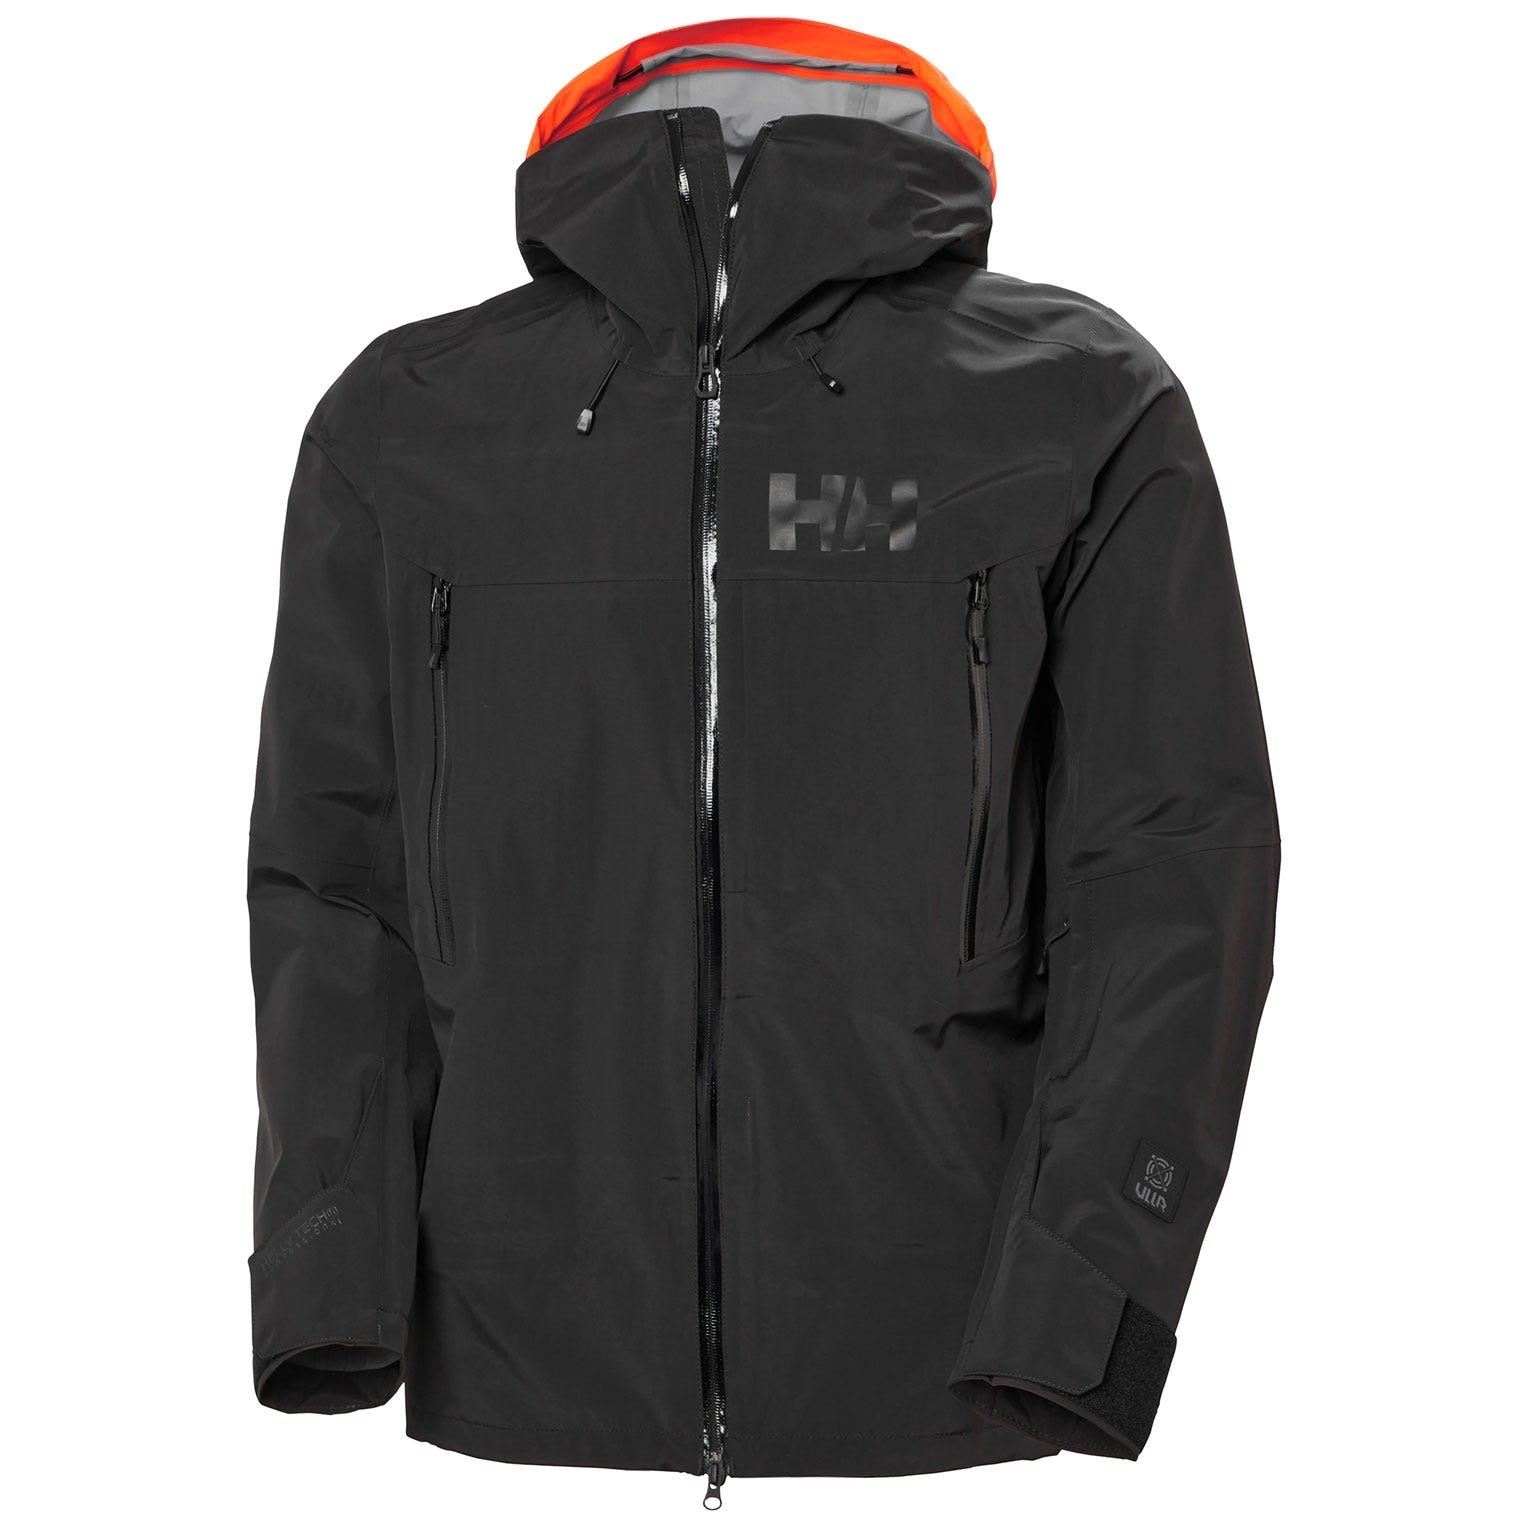 Sogn Shell 2.0 Jacket